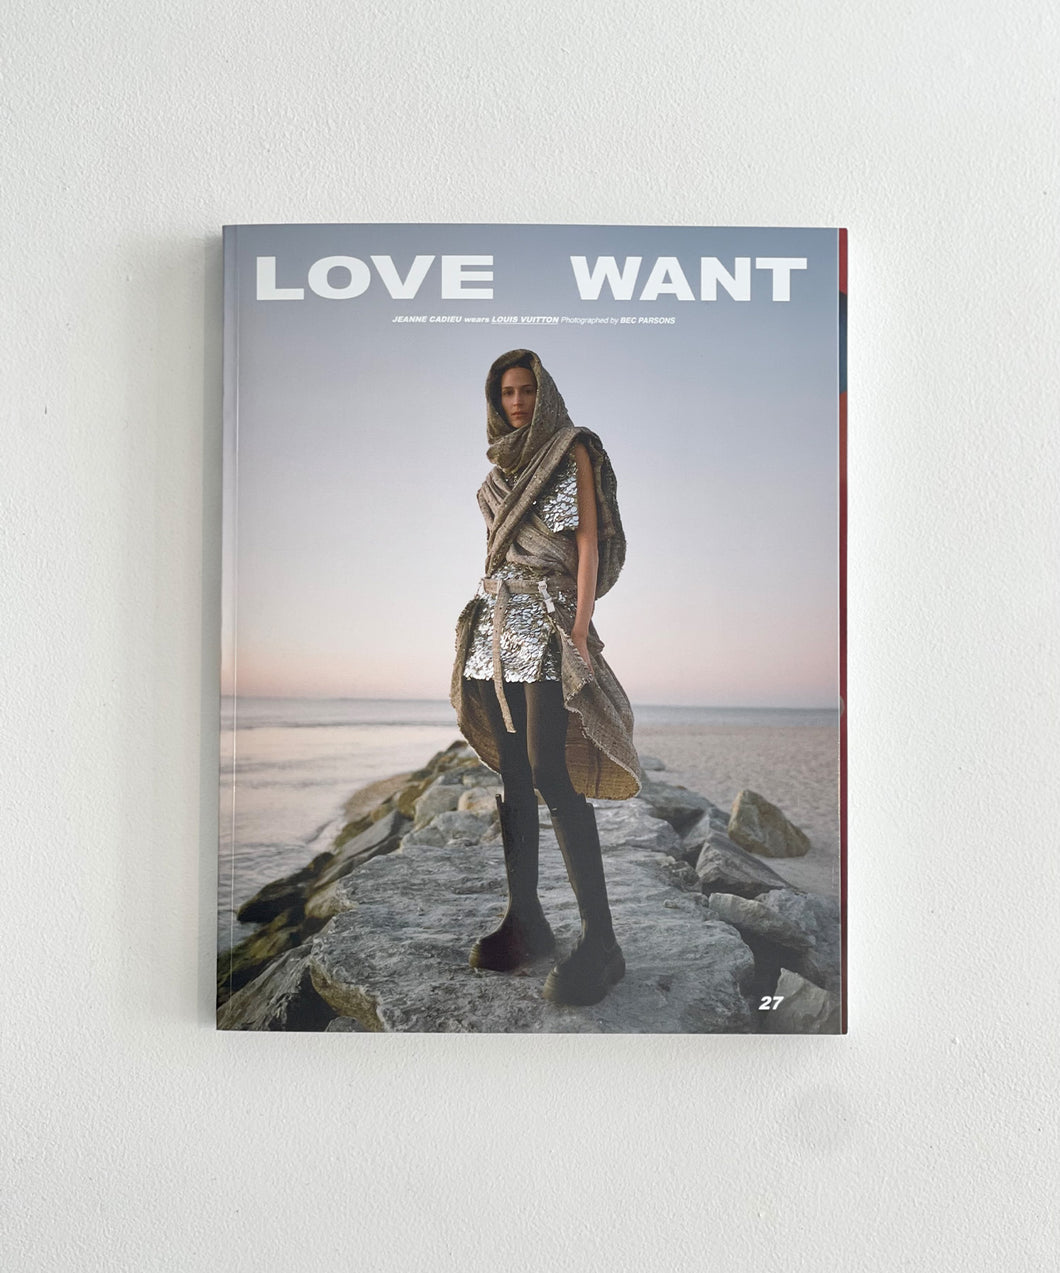 love want ISSUE 27